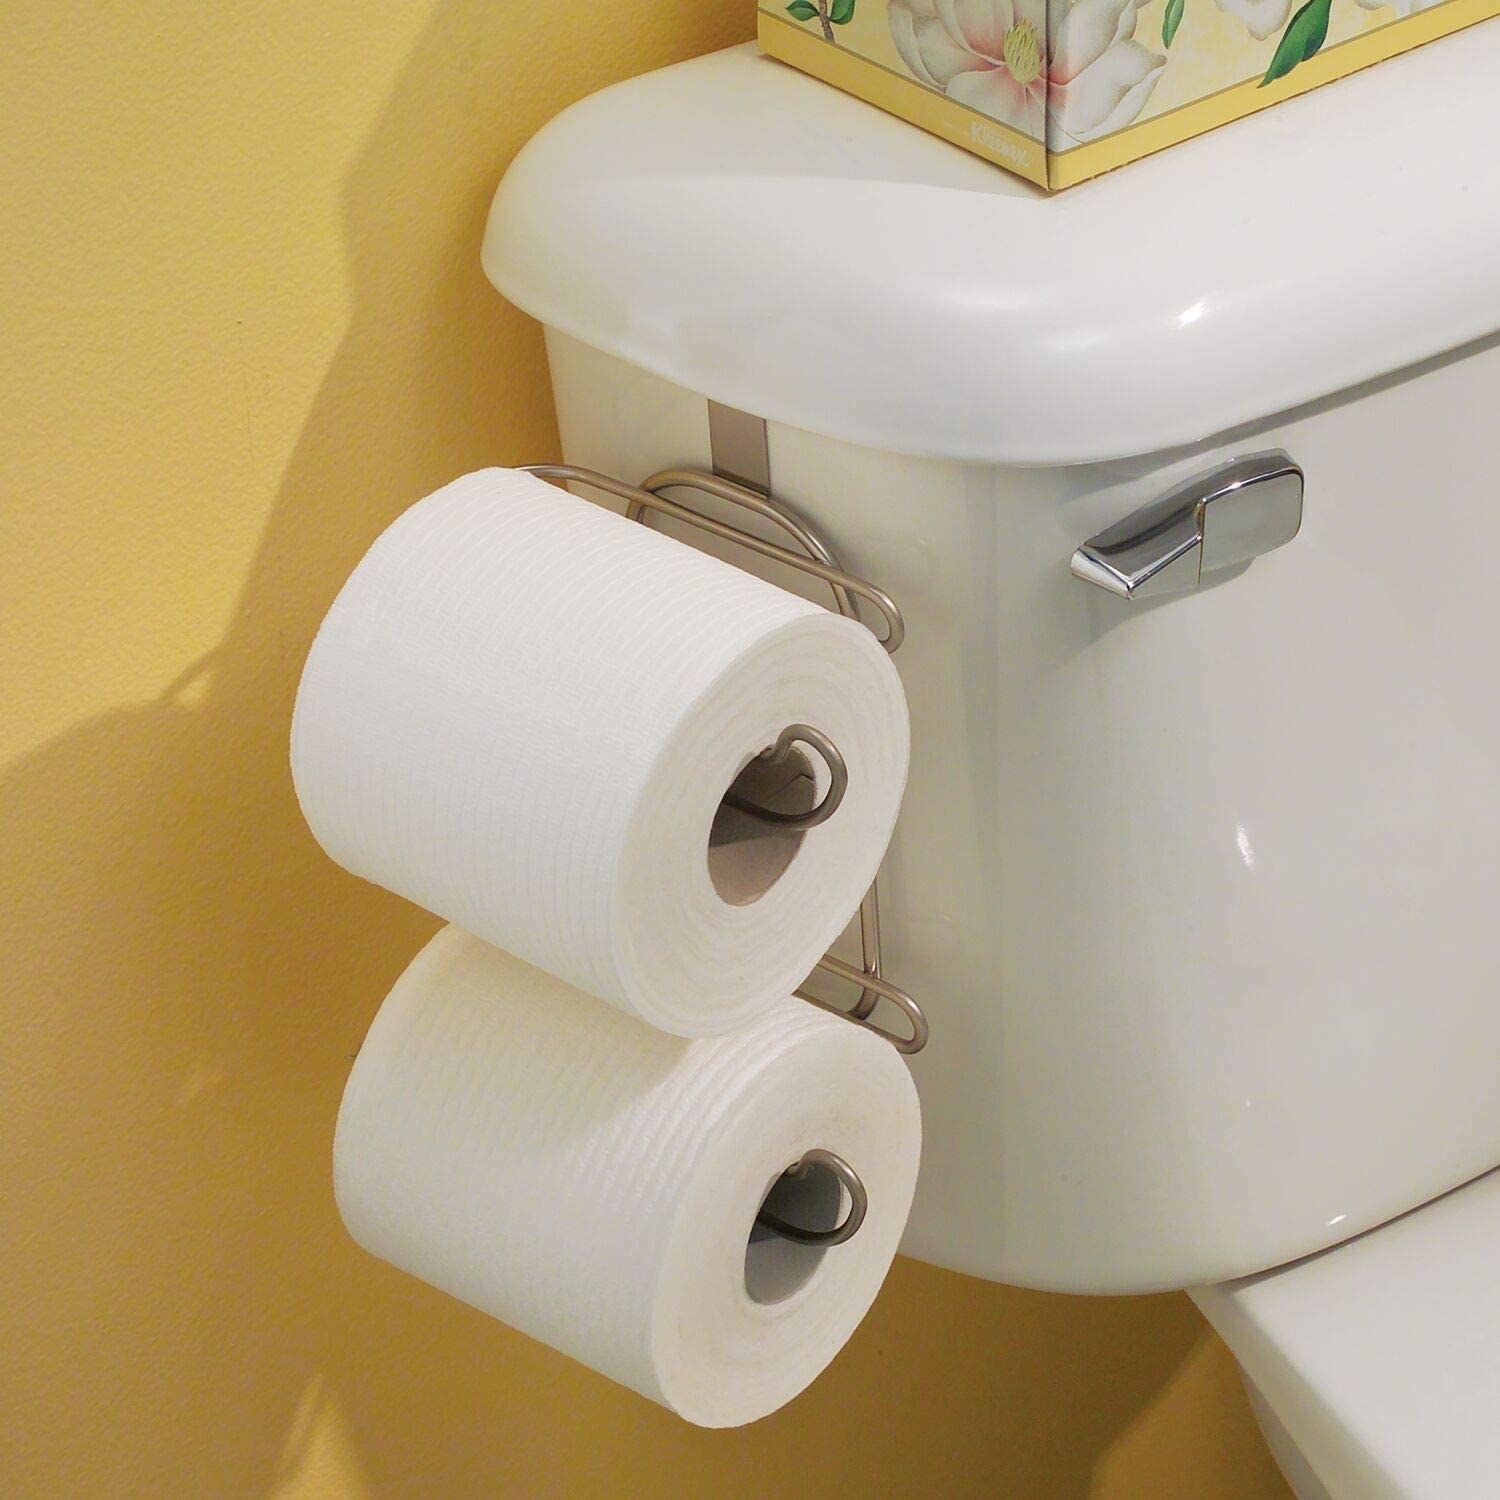 A double-decker toilet paper holder clipped to a toilet